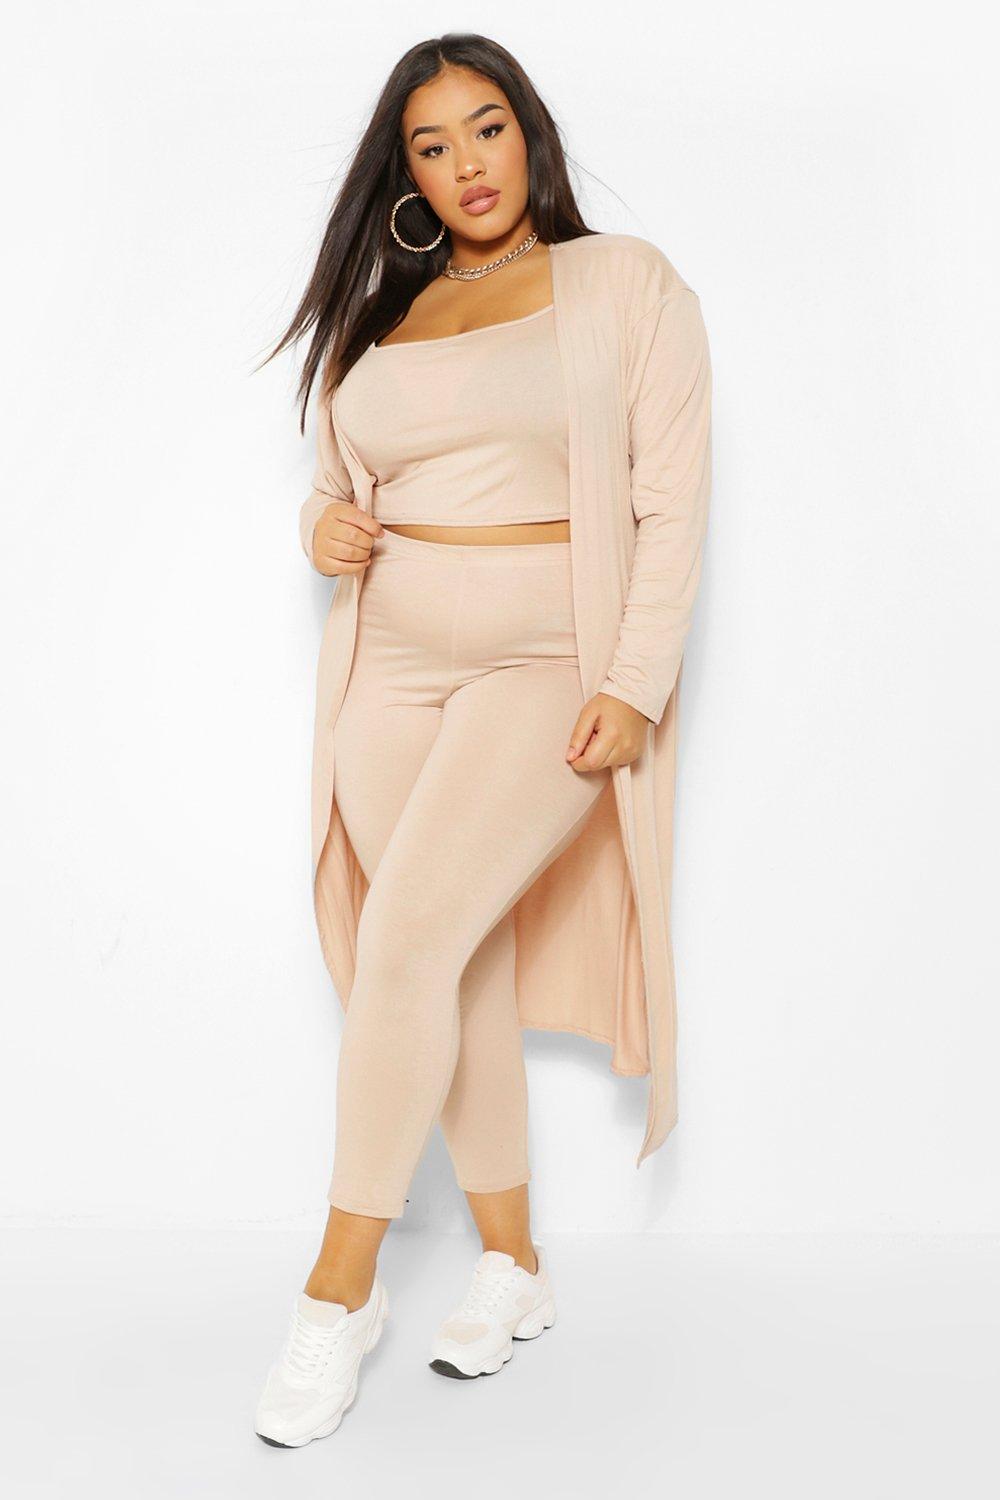 Beige Soft Touch Jersey Leggings, Two Piece Sets